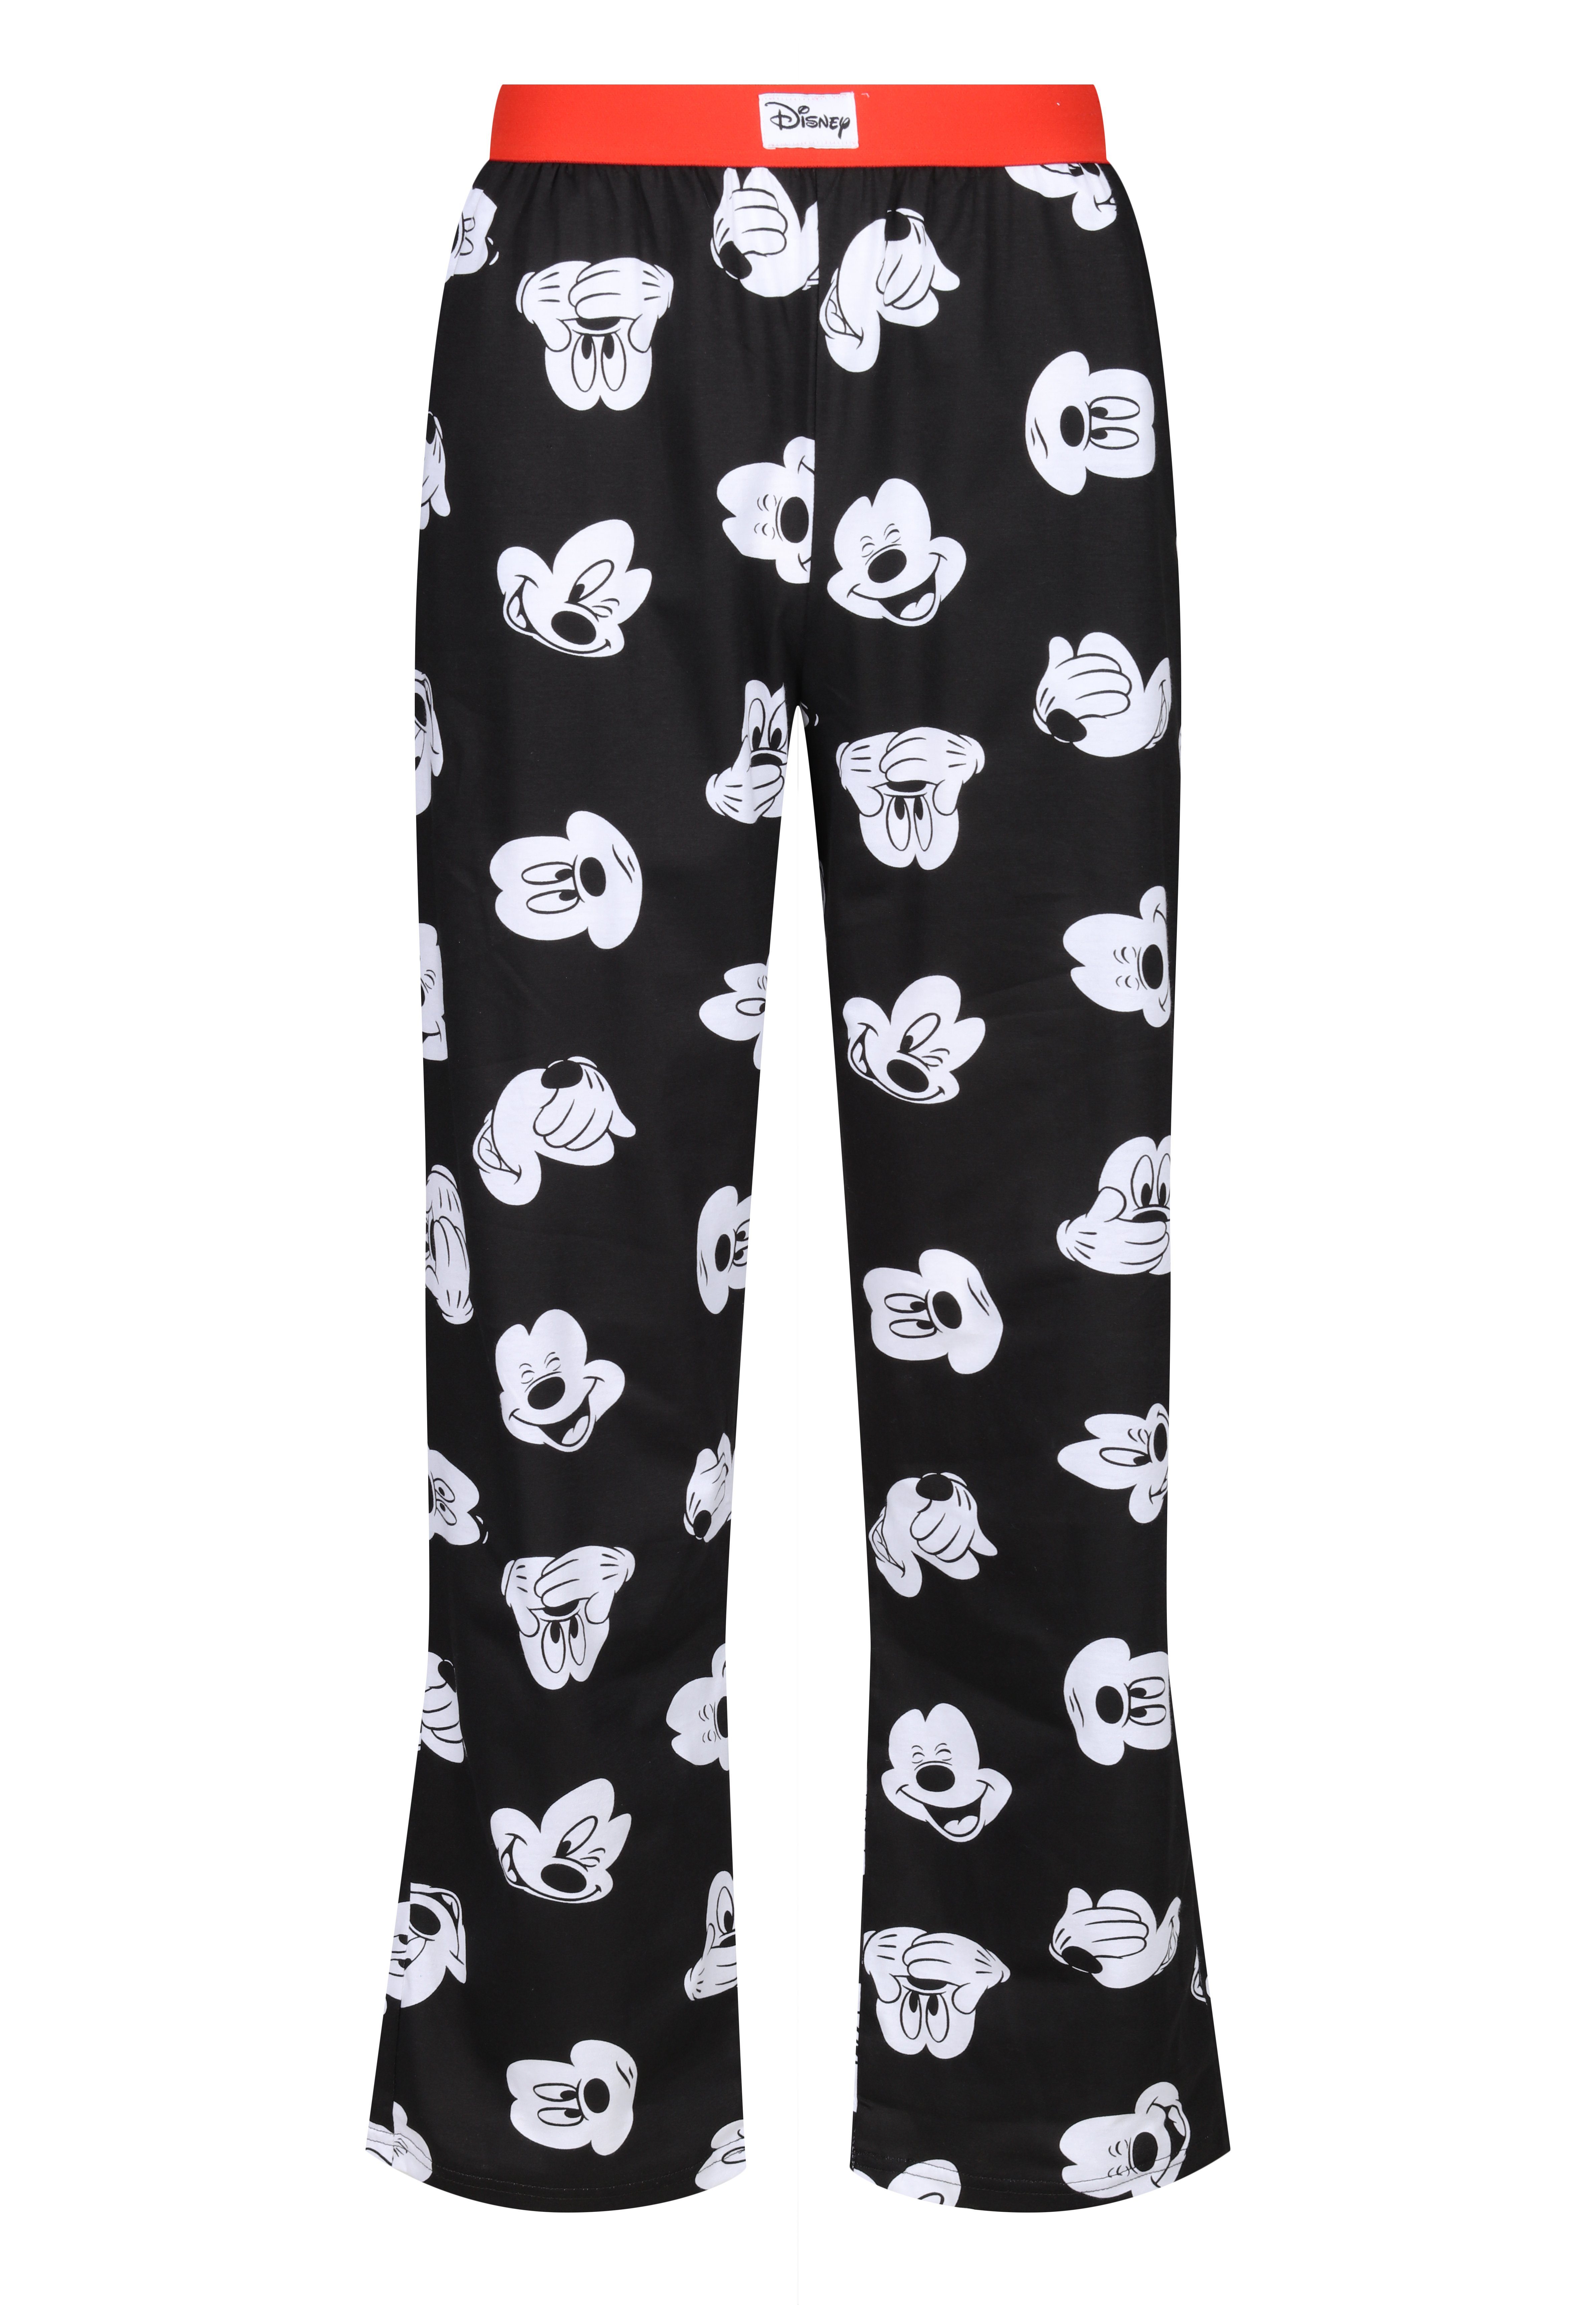 Recovered Loungepants Loungepant - Disney Mickey Expressions Black